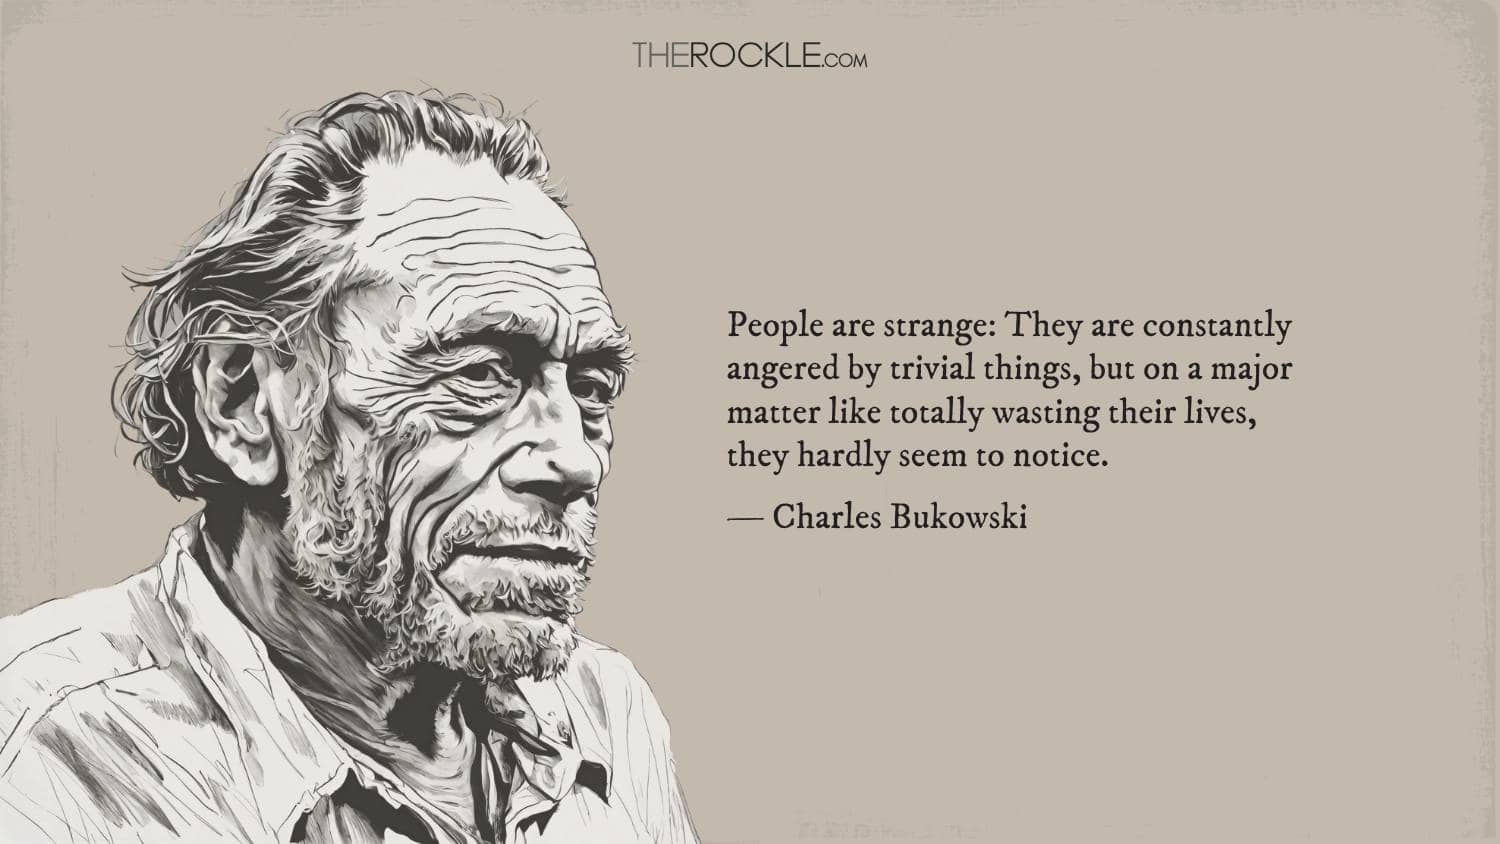 Charles Bukowski drawing and quote